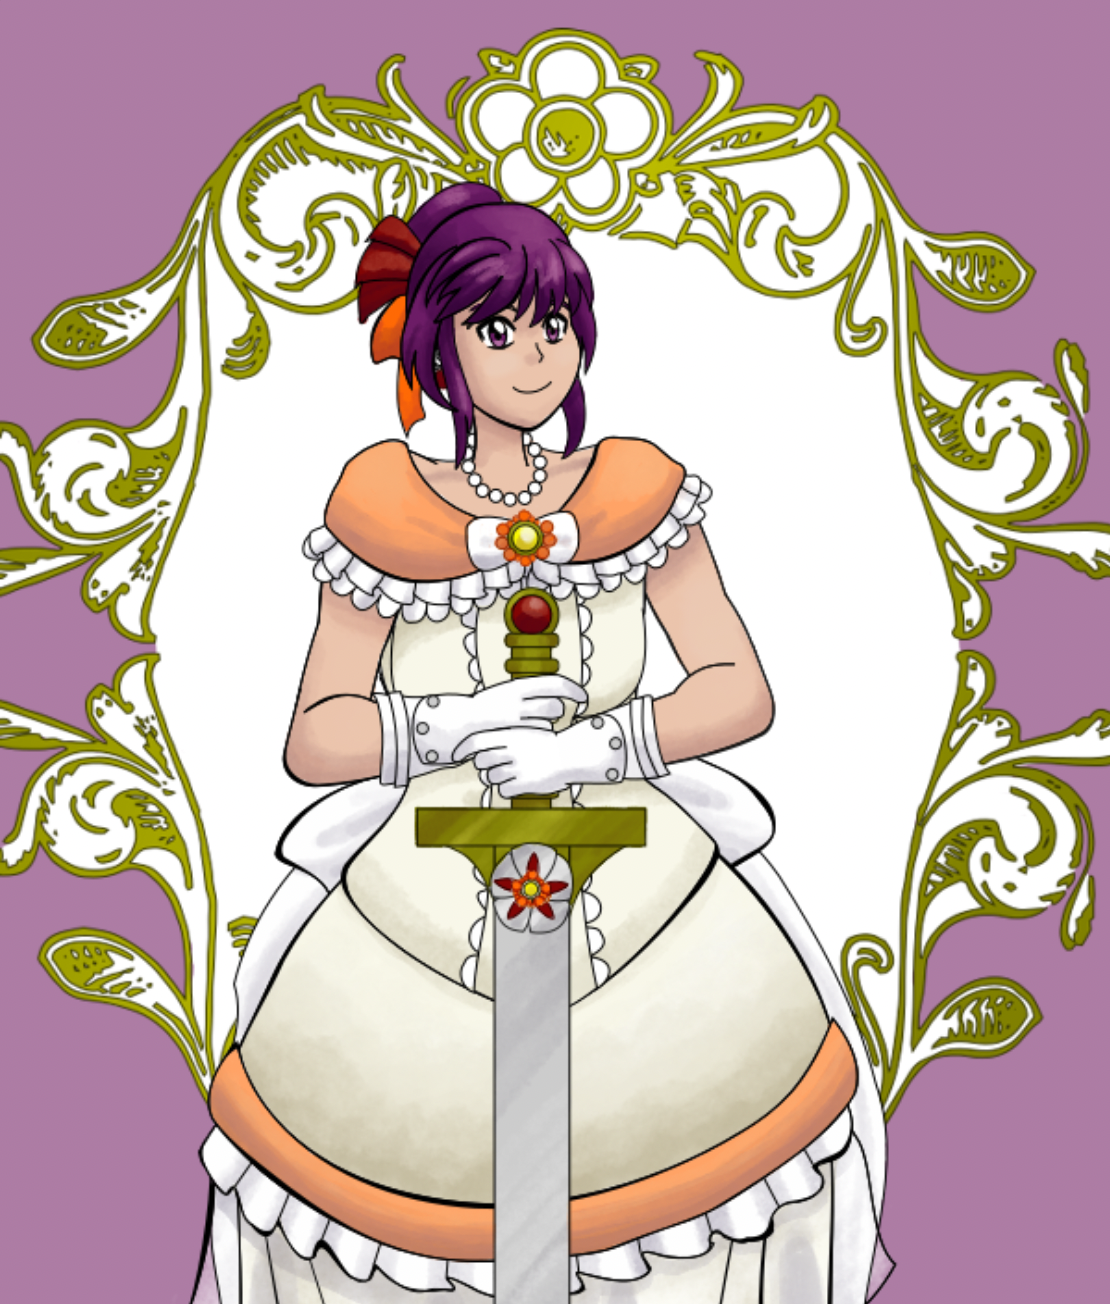 The character is fully shaded and a white background was added between a border to confine the background within the border